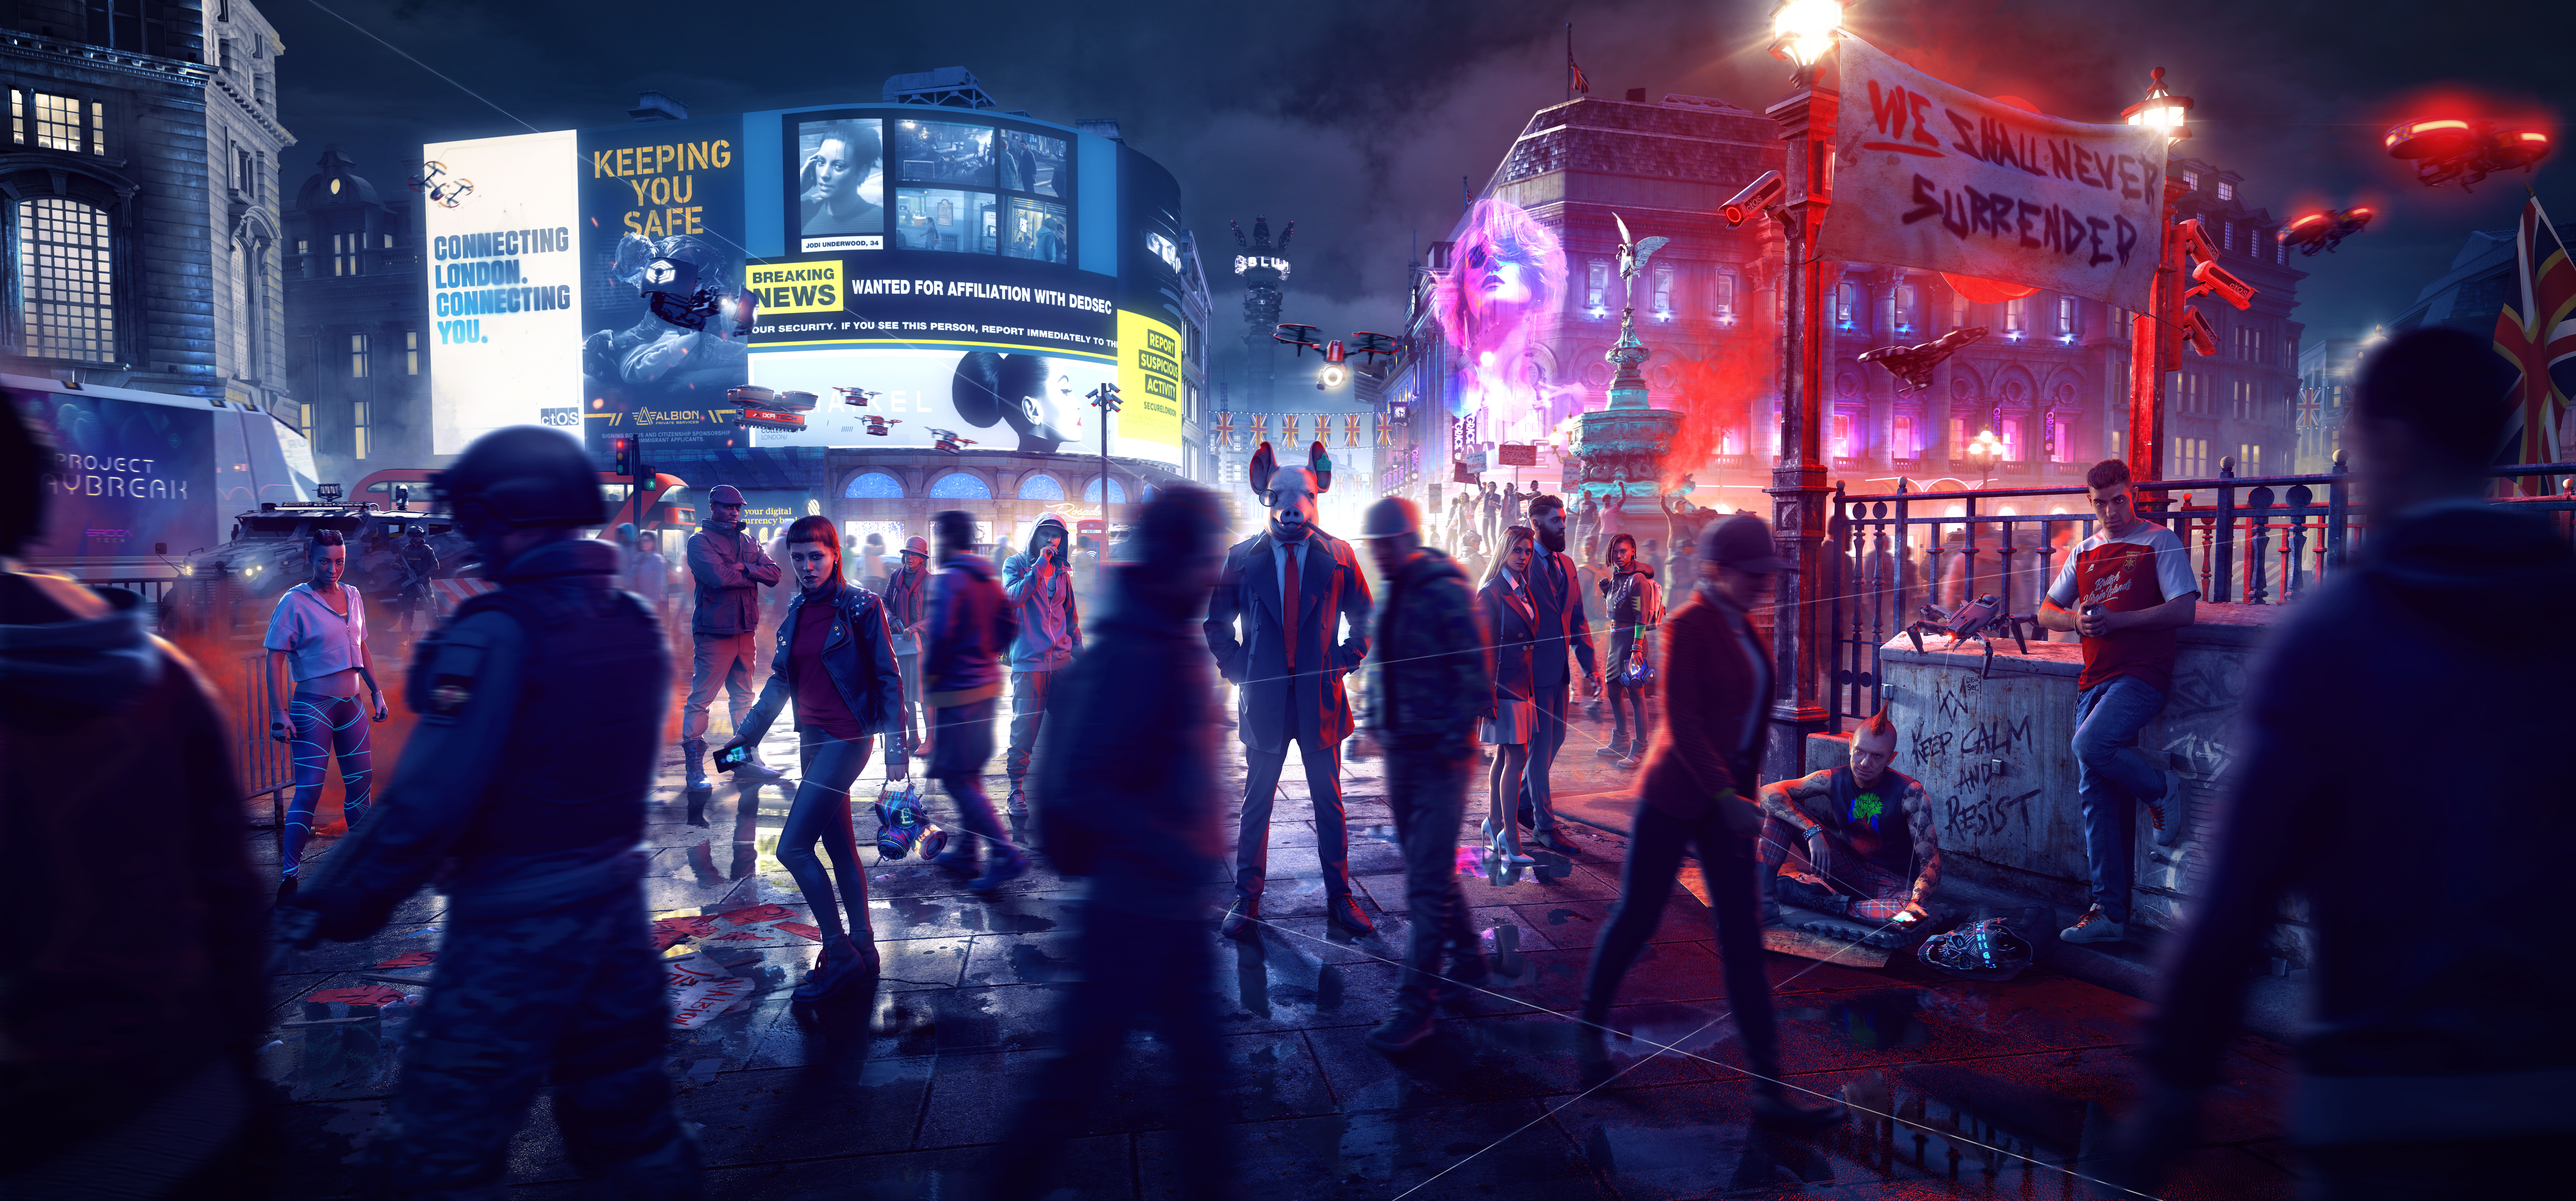 Watch Dogs 2 Full Hd Hdtv 1080p 16 9 Wallpapers Hd Watch Dogs 2 19x1080 Backgrounds Free Images Download